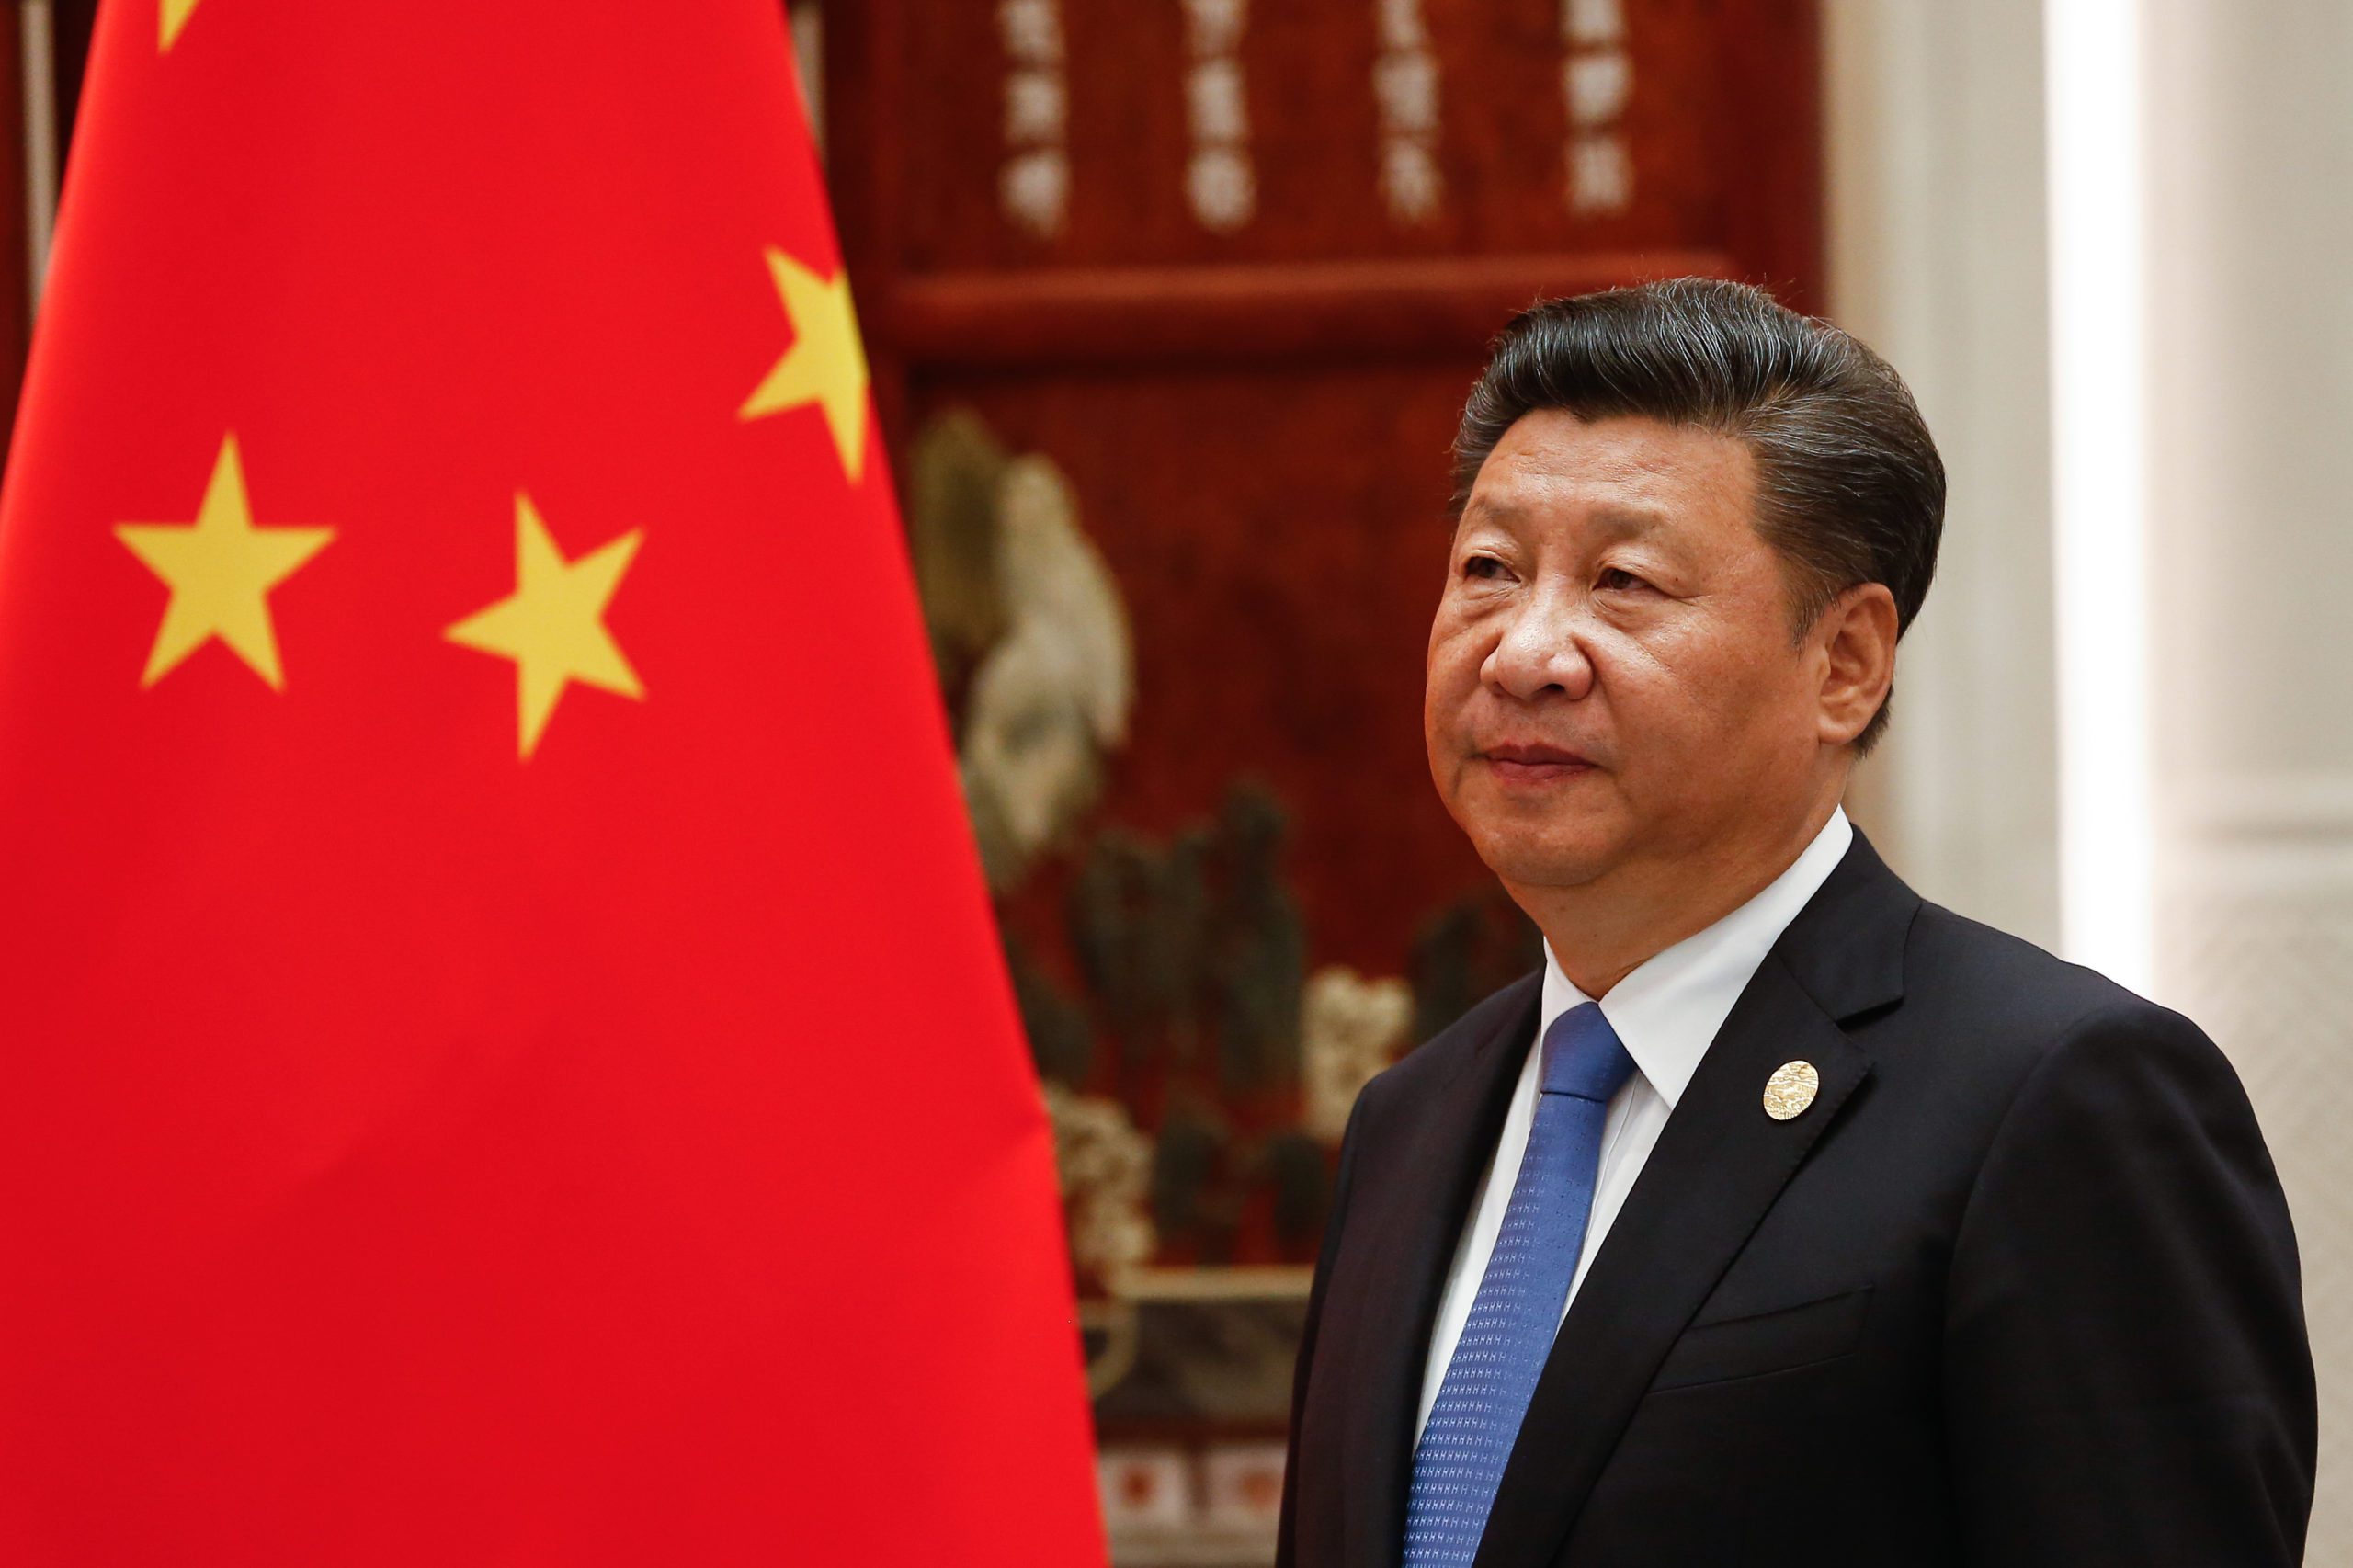 President of the People's Republic of China, Xi Jinping